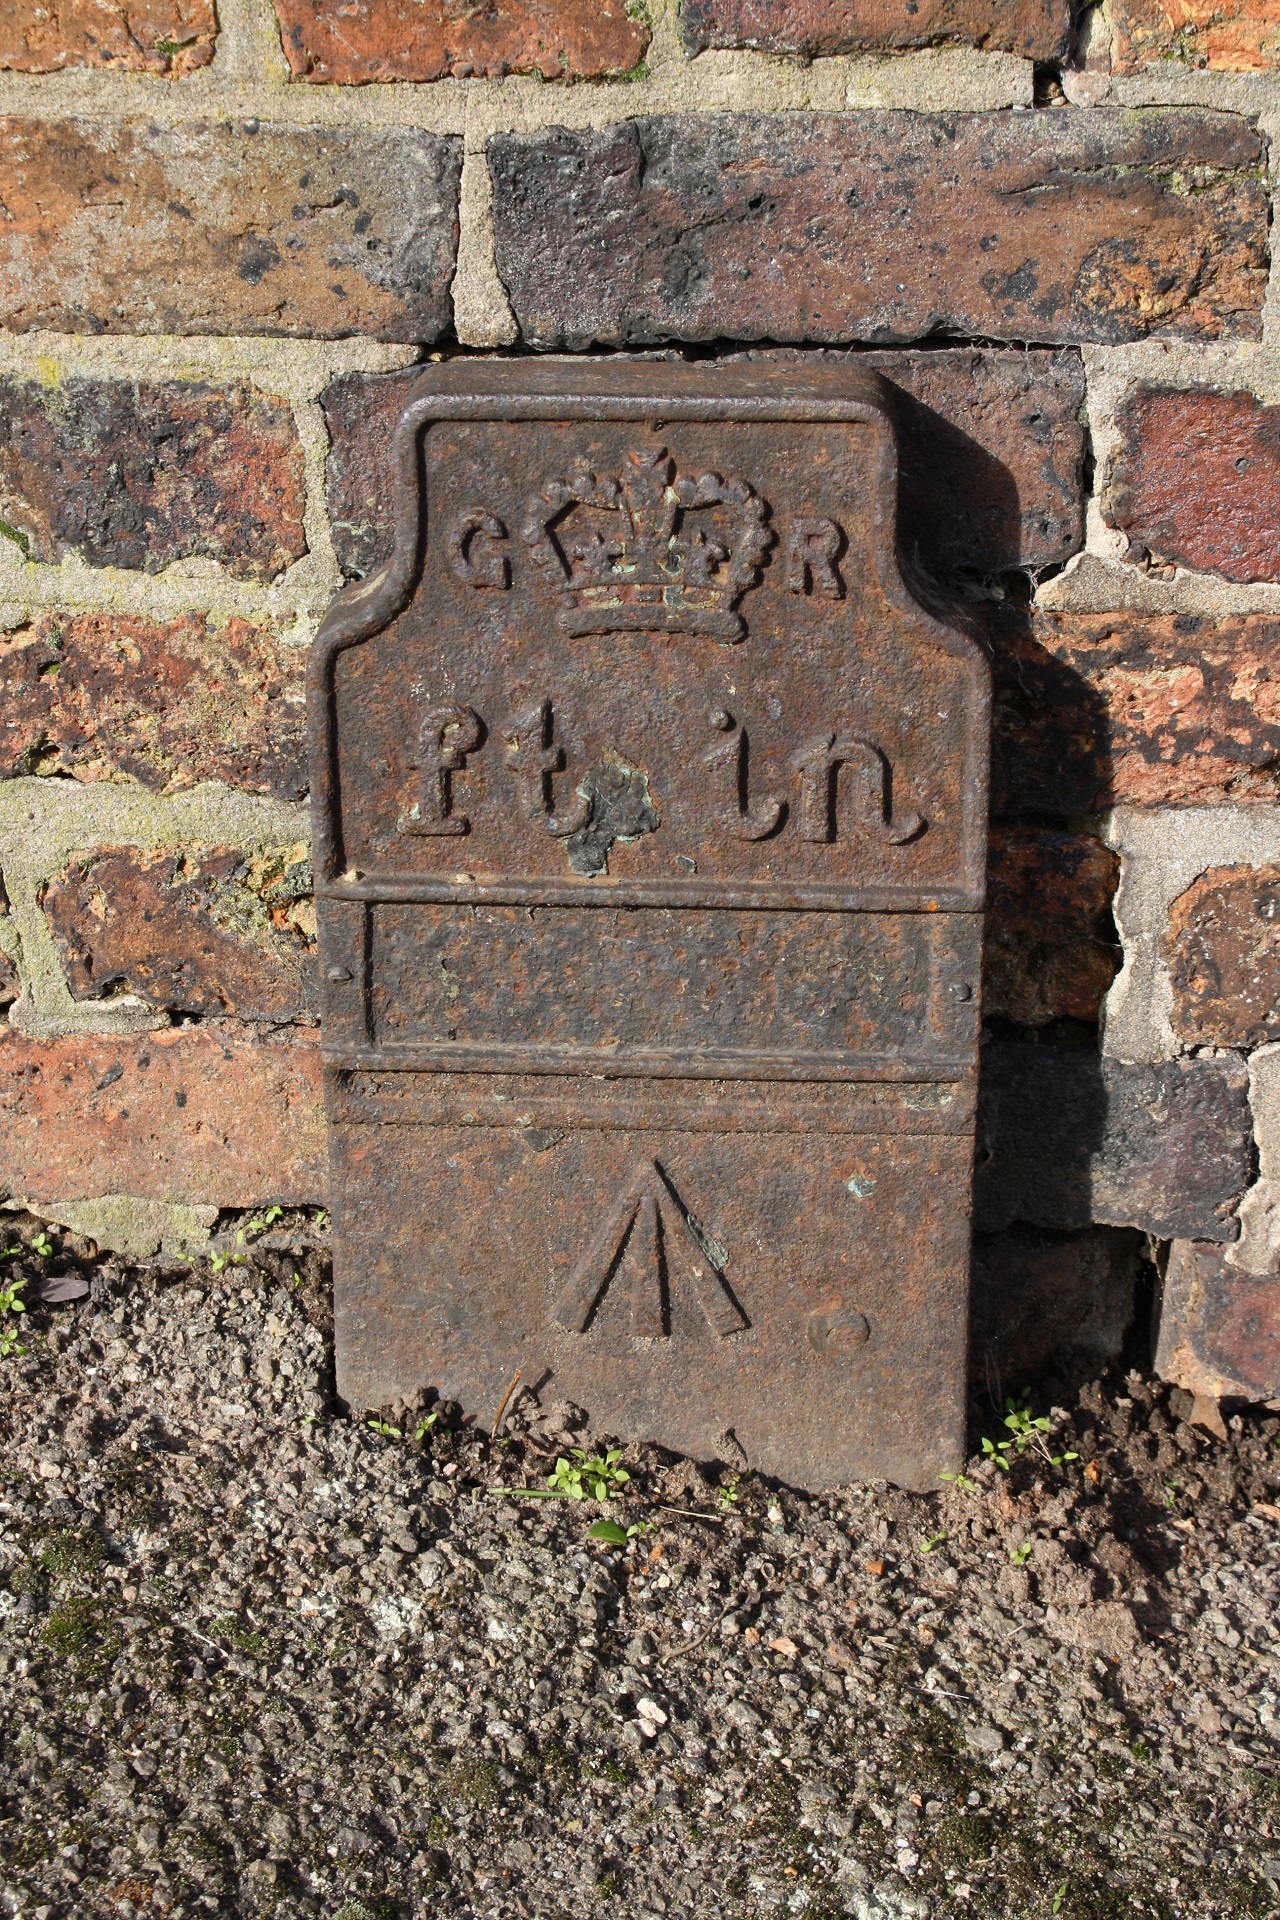 Telegraph cable marker post at Drapers Fields Bridge, jnc. Leicester Row, Coventry by Roger Templeman 